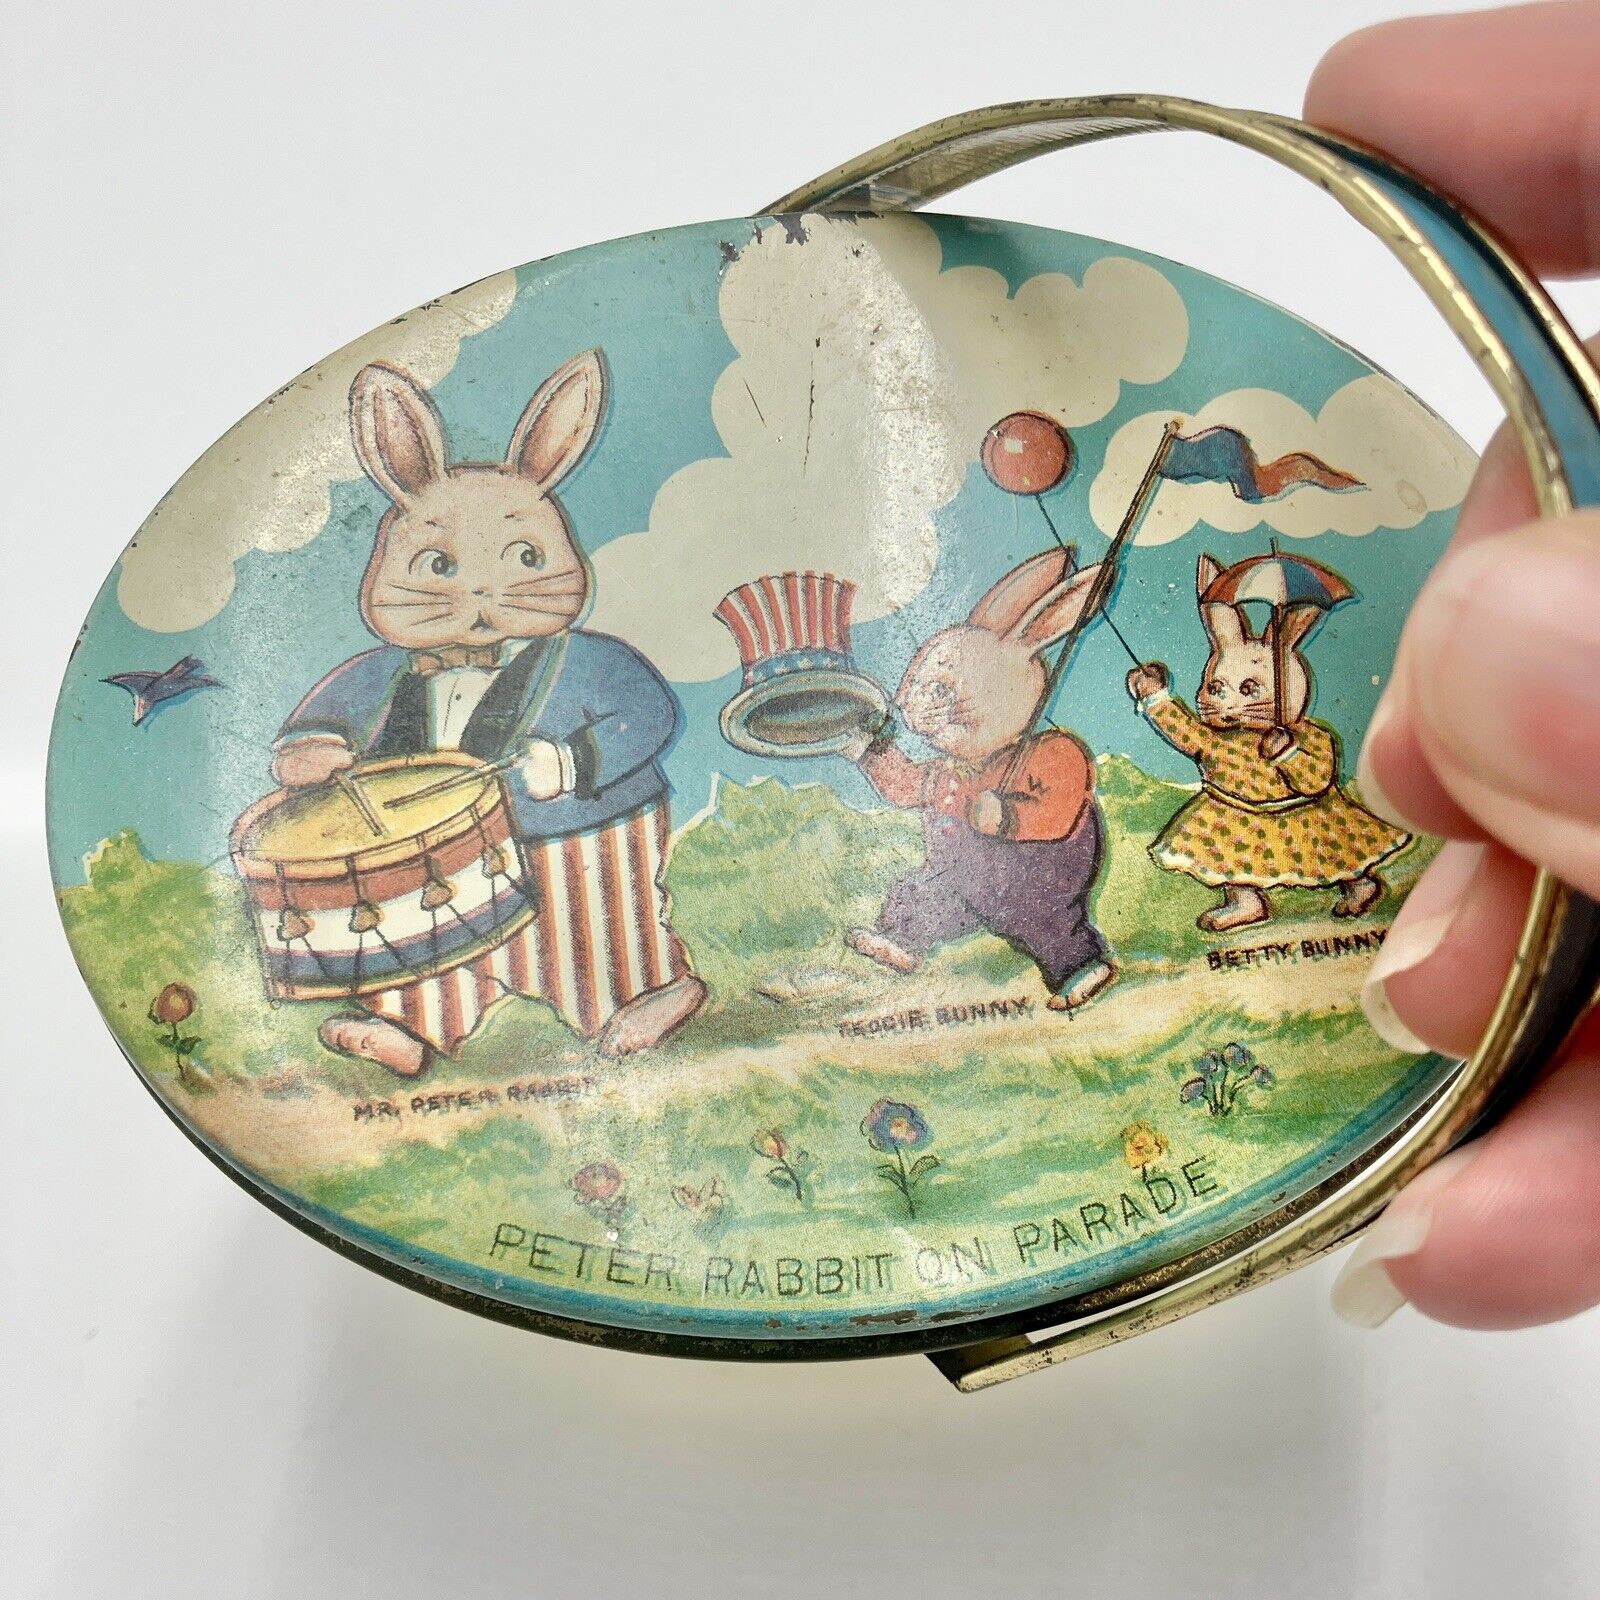 Vtg  Lithograph PETER RABBIT ON PARADE Tindeco Tin Can  July 4th Decor 1930s